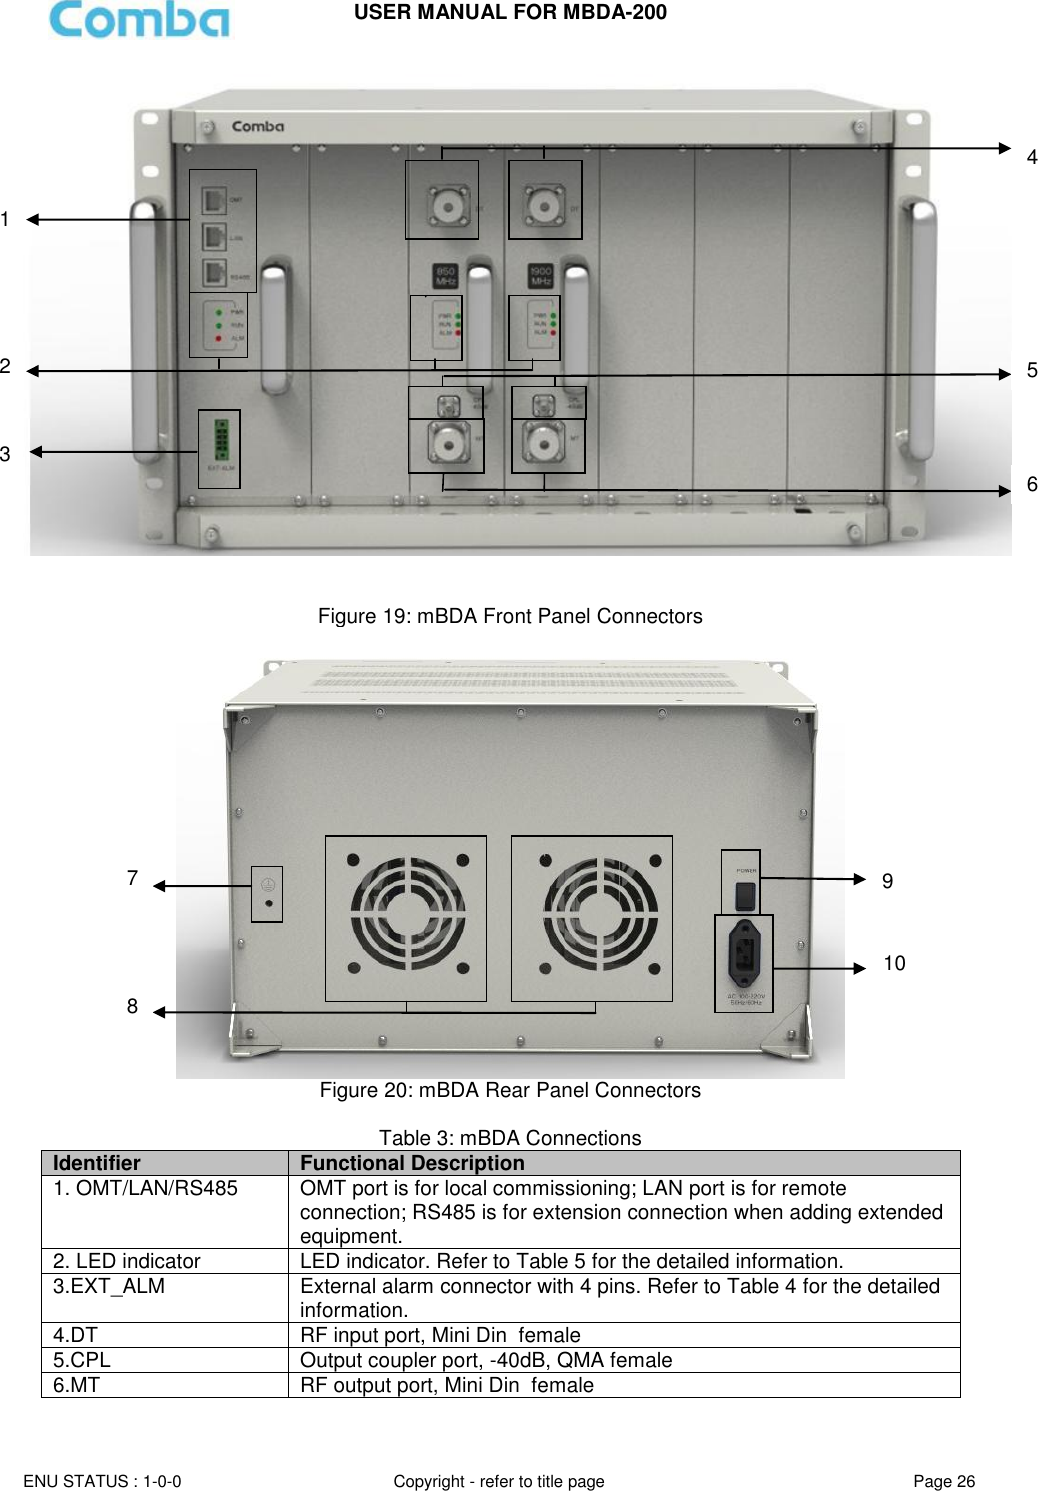 USER MANUAL FOR MBDA-200  ENU STATUS : 1-0-0 Copyright - refer to title page Page 26         Figure 19: mBDA Front Panel Connectors  Figure 20: mBDA Rear Panel Connectors  Table 3: mBDA Connections Identifier Functional Description 1. OMT/LAN/RS485 OMT port is for local commissioning; LAN port is for remote connection; RS485 is for extension connection when adding extended equipment. 2. LED indicator LED indicator. Refer to Table 5 for the detailed information.  3.EXT_ALM External alarm connector with 4 pins. Refer to Table 4 for the detailed information. 4.DT RF input port, Mini Din  female 5.CPL Output coupler port, -40dB, QMA female 6.MT RF output port, Mini Din  female 1 2 3 4 5 6 7 8 9 10 